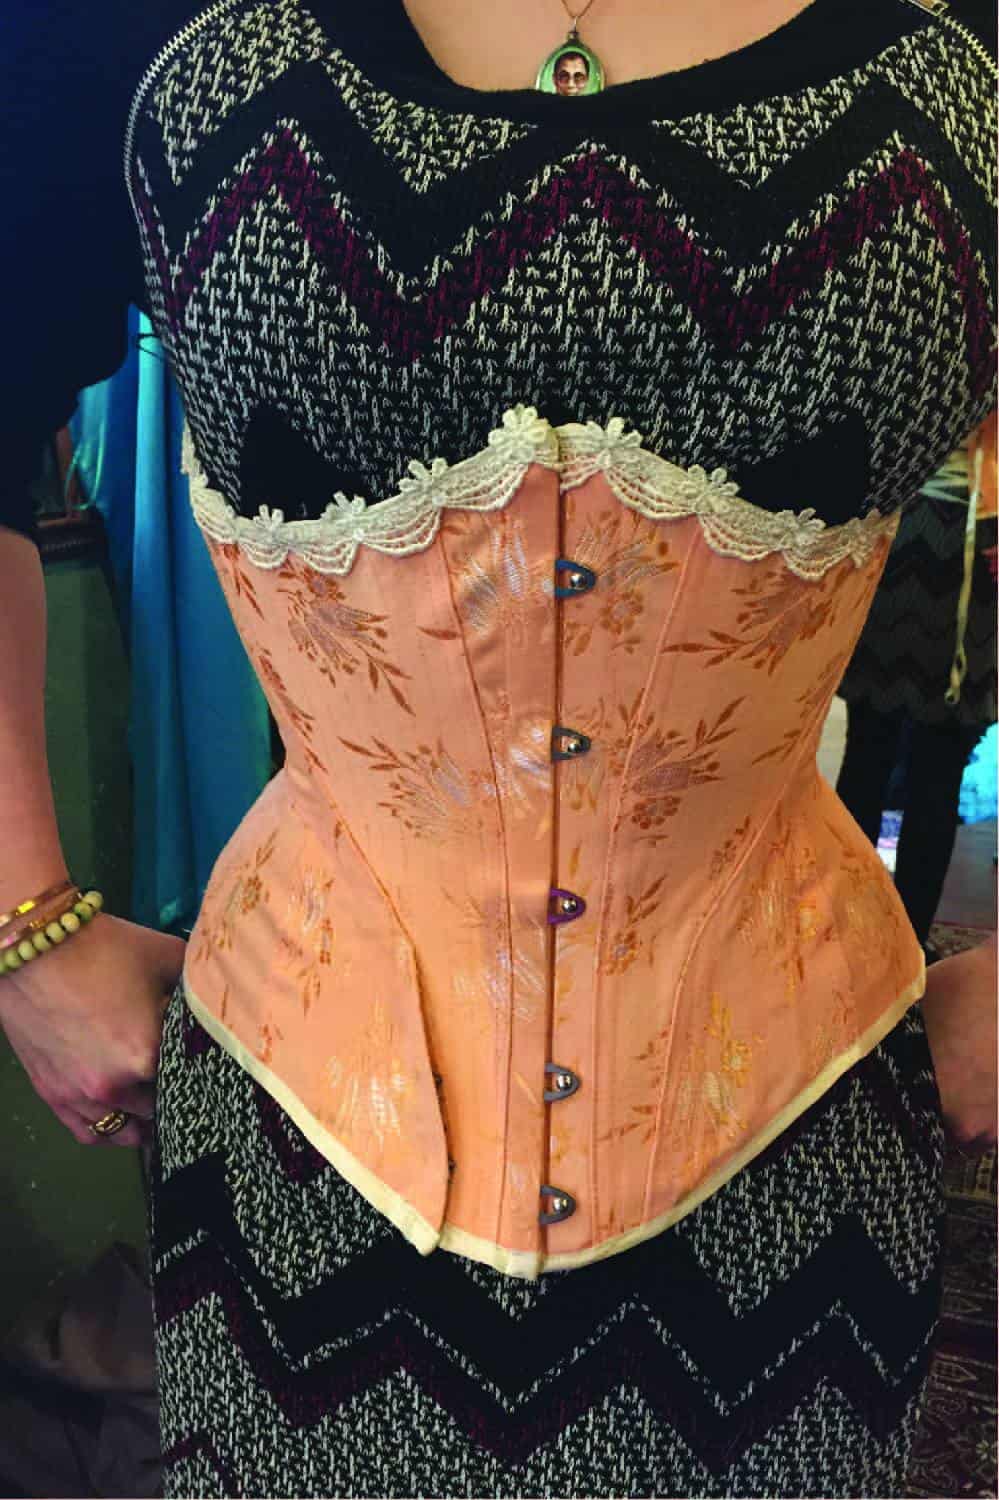 Handcrafted Authentic Edwardian Corset Design Powder Blue With Lace Detail  and Garters Made to Measure Perfect for Weddings or Boudoir -  Canada